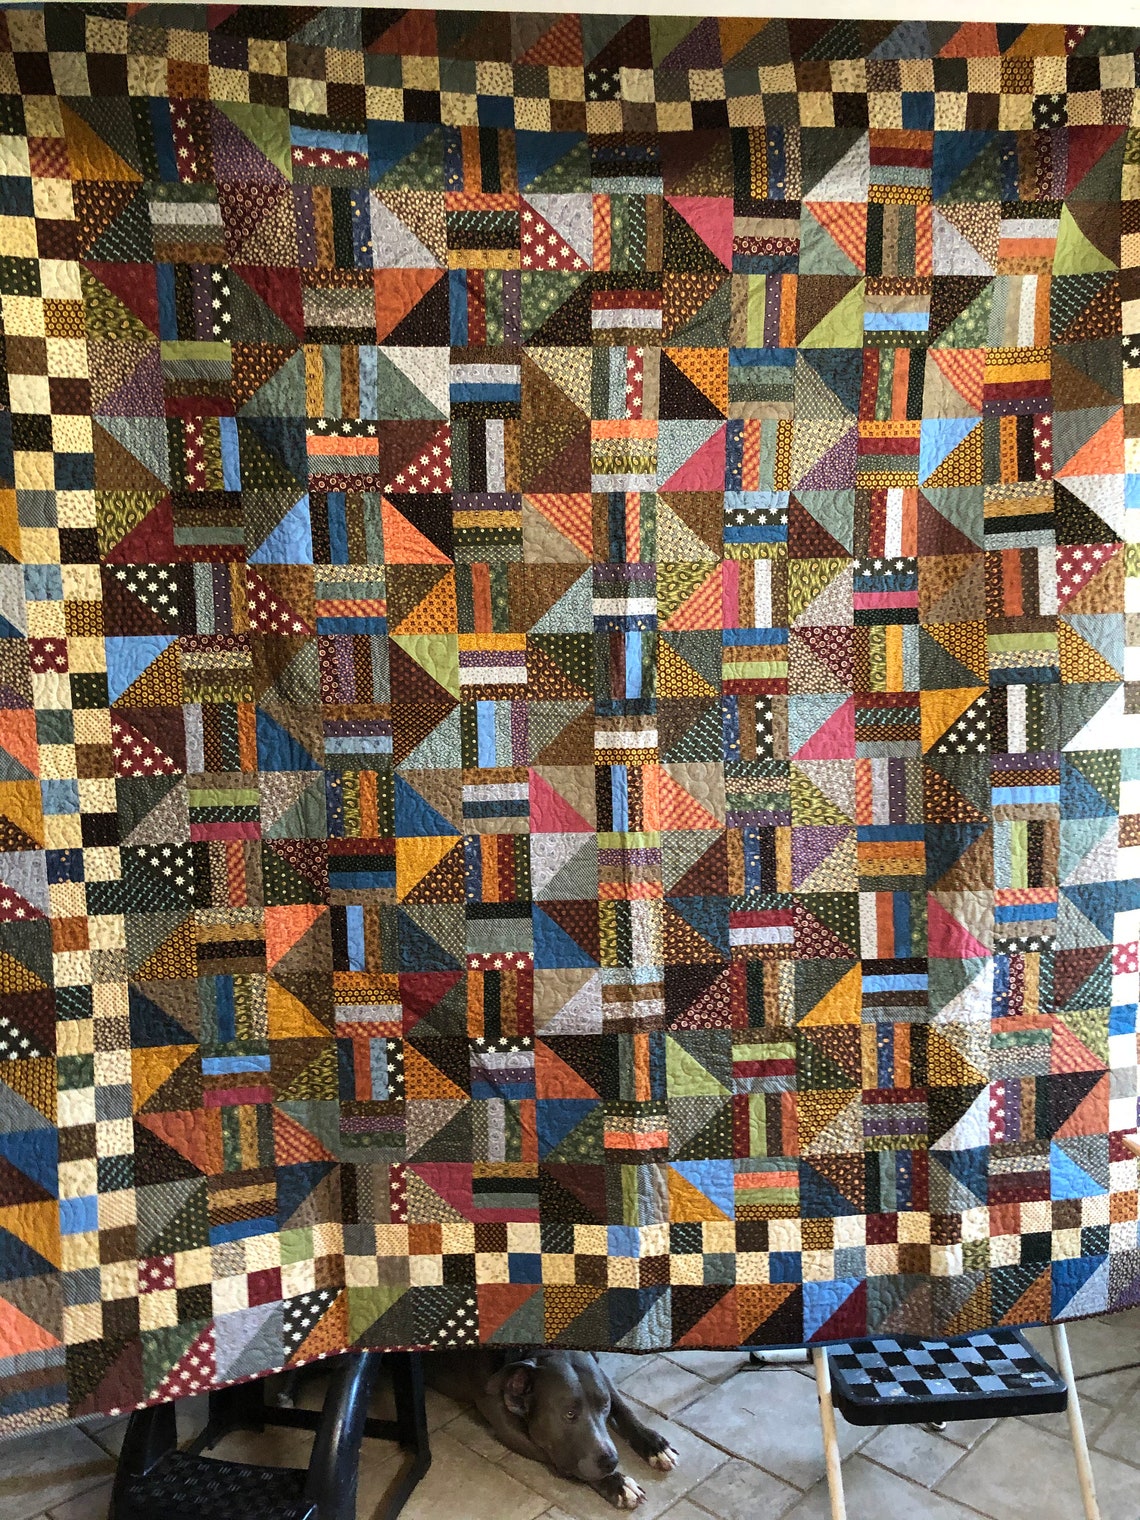 Pieced Quilt With Reproduction Fabric - Etsy